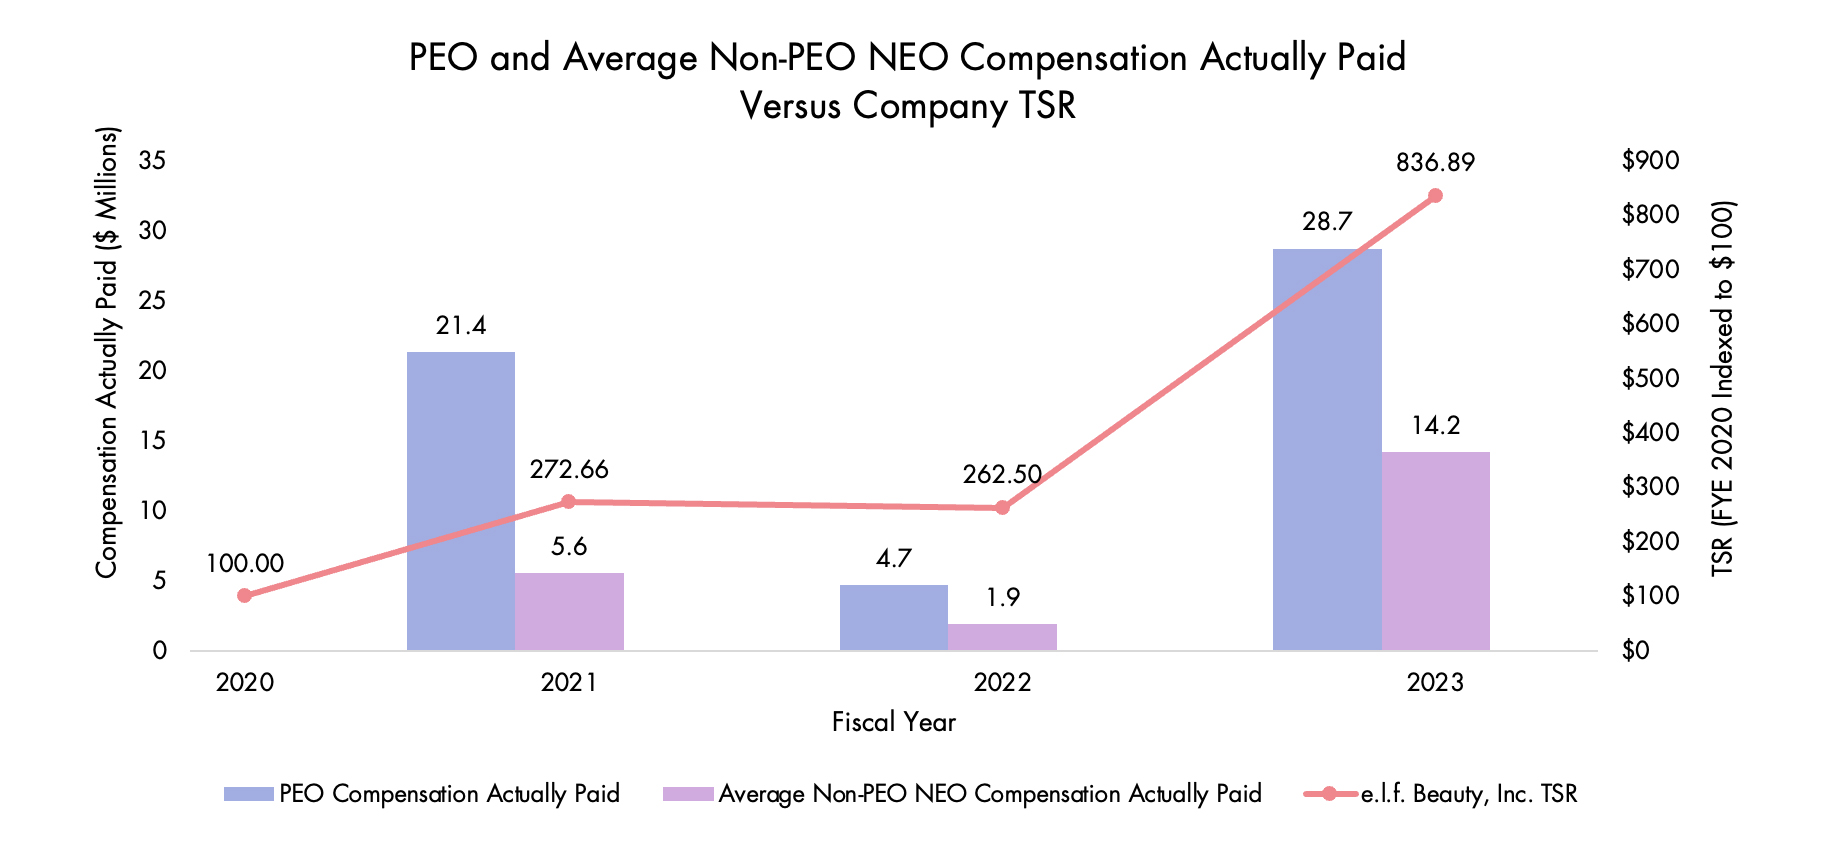 PEO and Average Non-PEO NEO Compensation Actually Paid Versus Company TSR.jpg